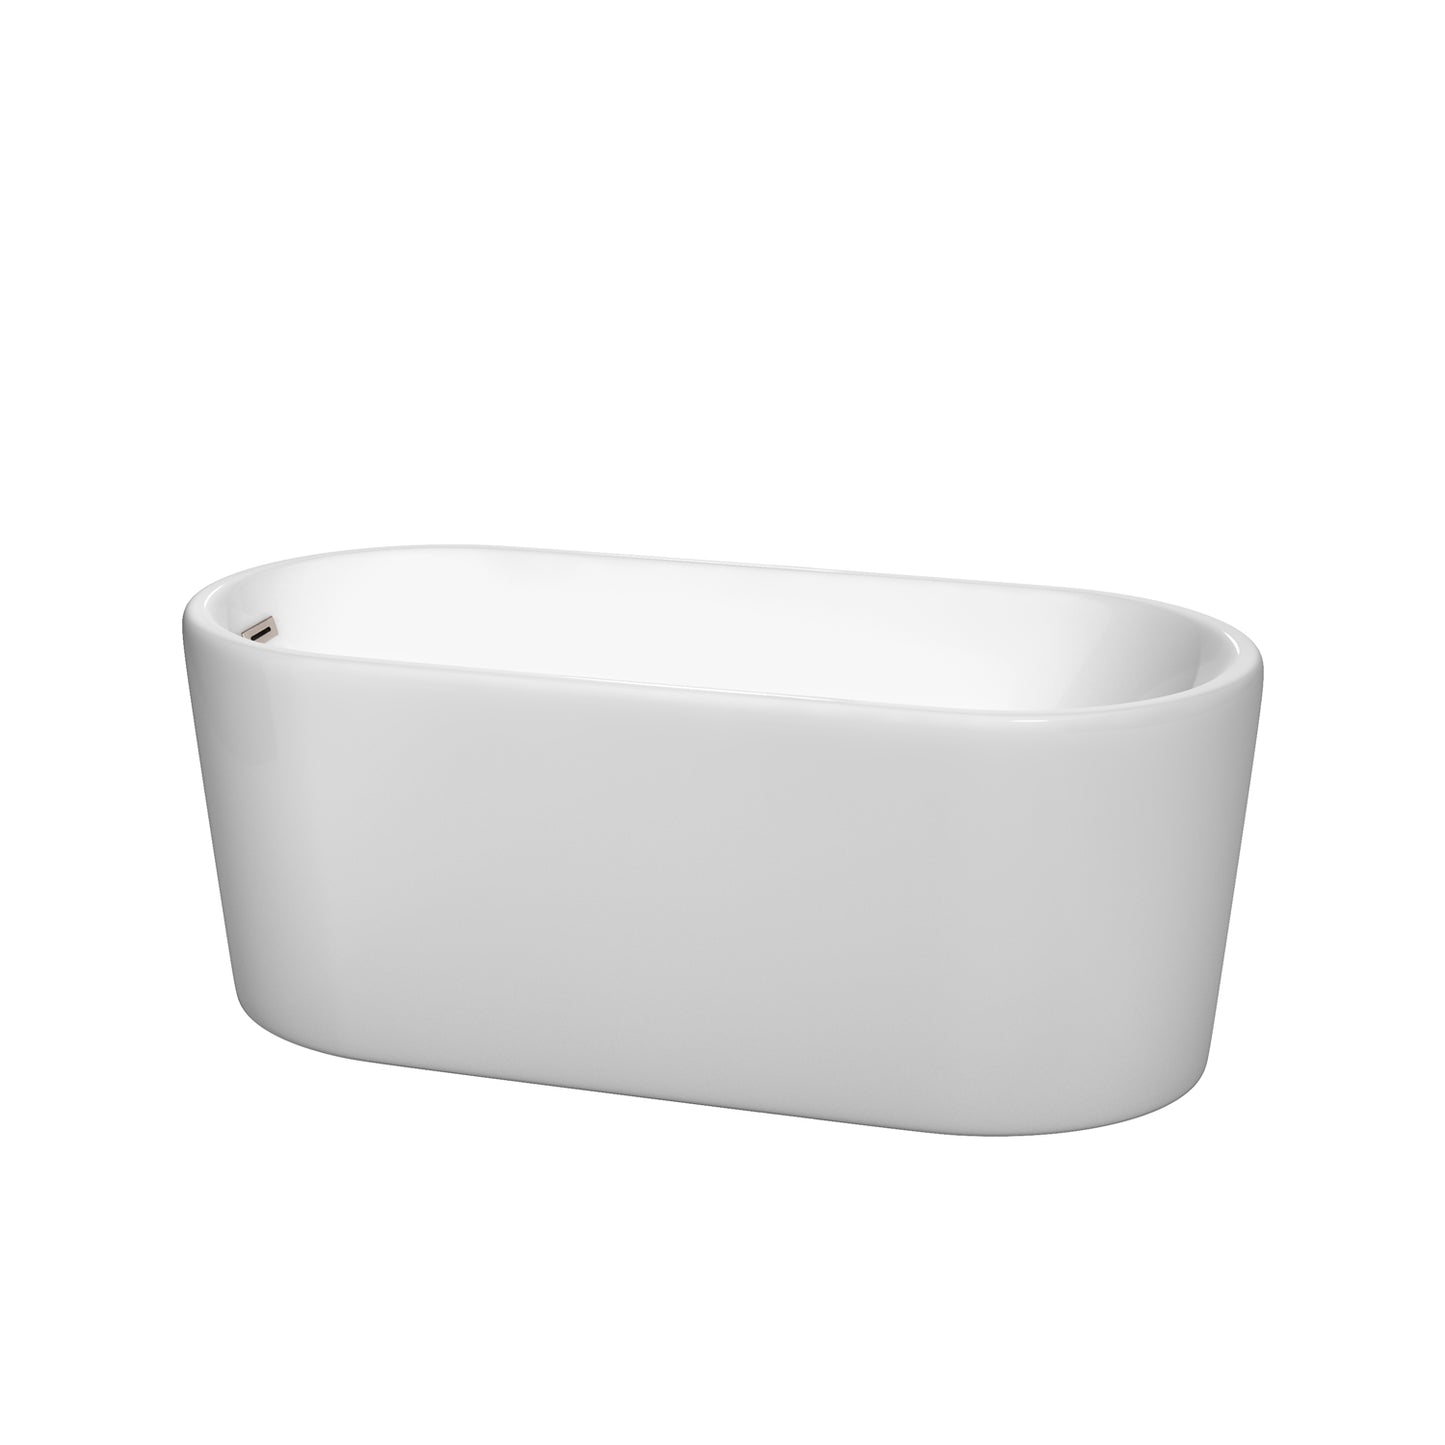 Wyndham Collection Ursula 59 Inch Freestanding Bathtub in White with Brushed Nickel Drain and Overflow Trim - Luxe Bathroom Vanities